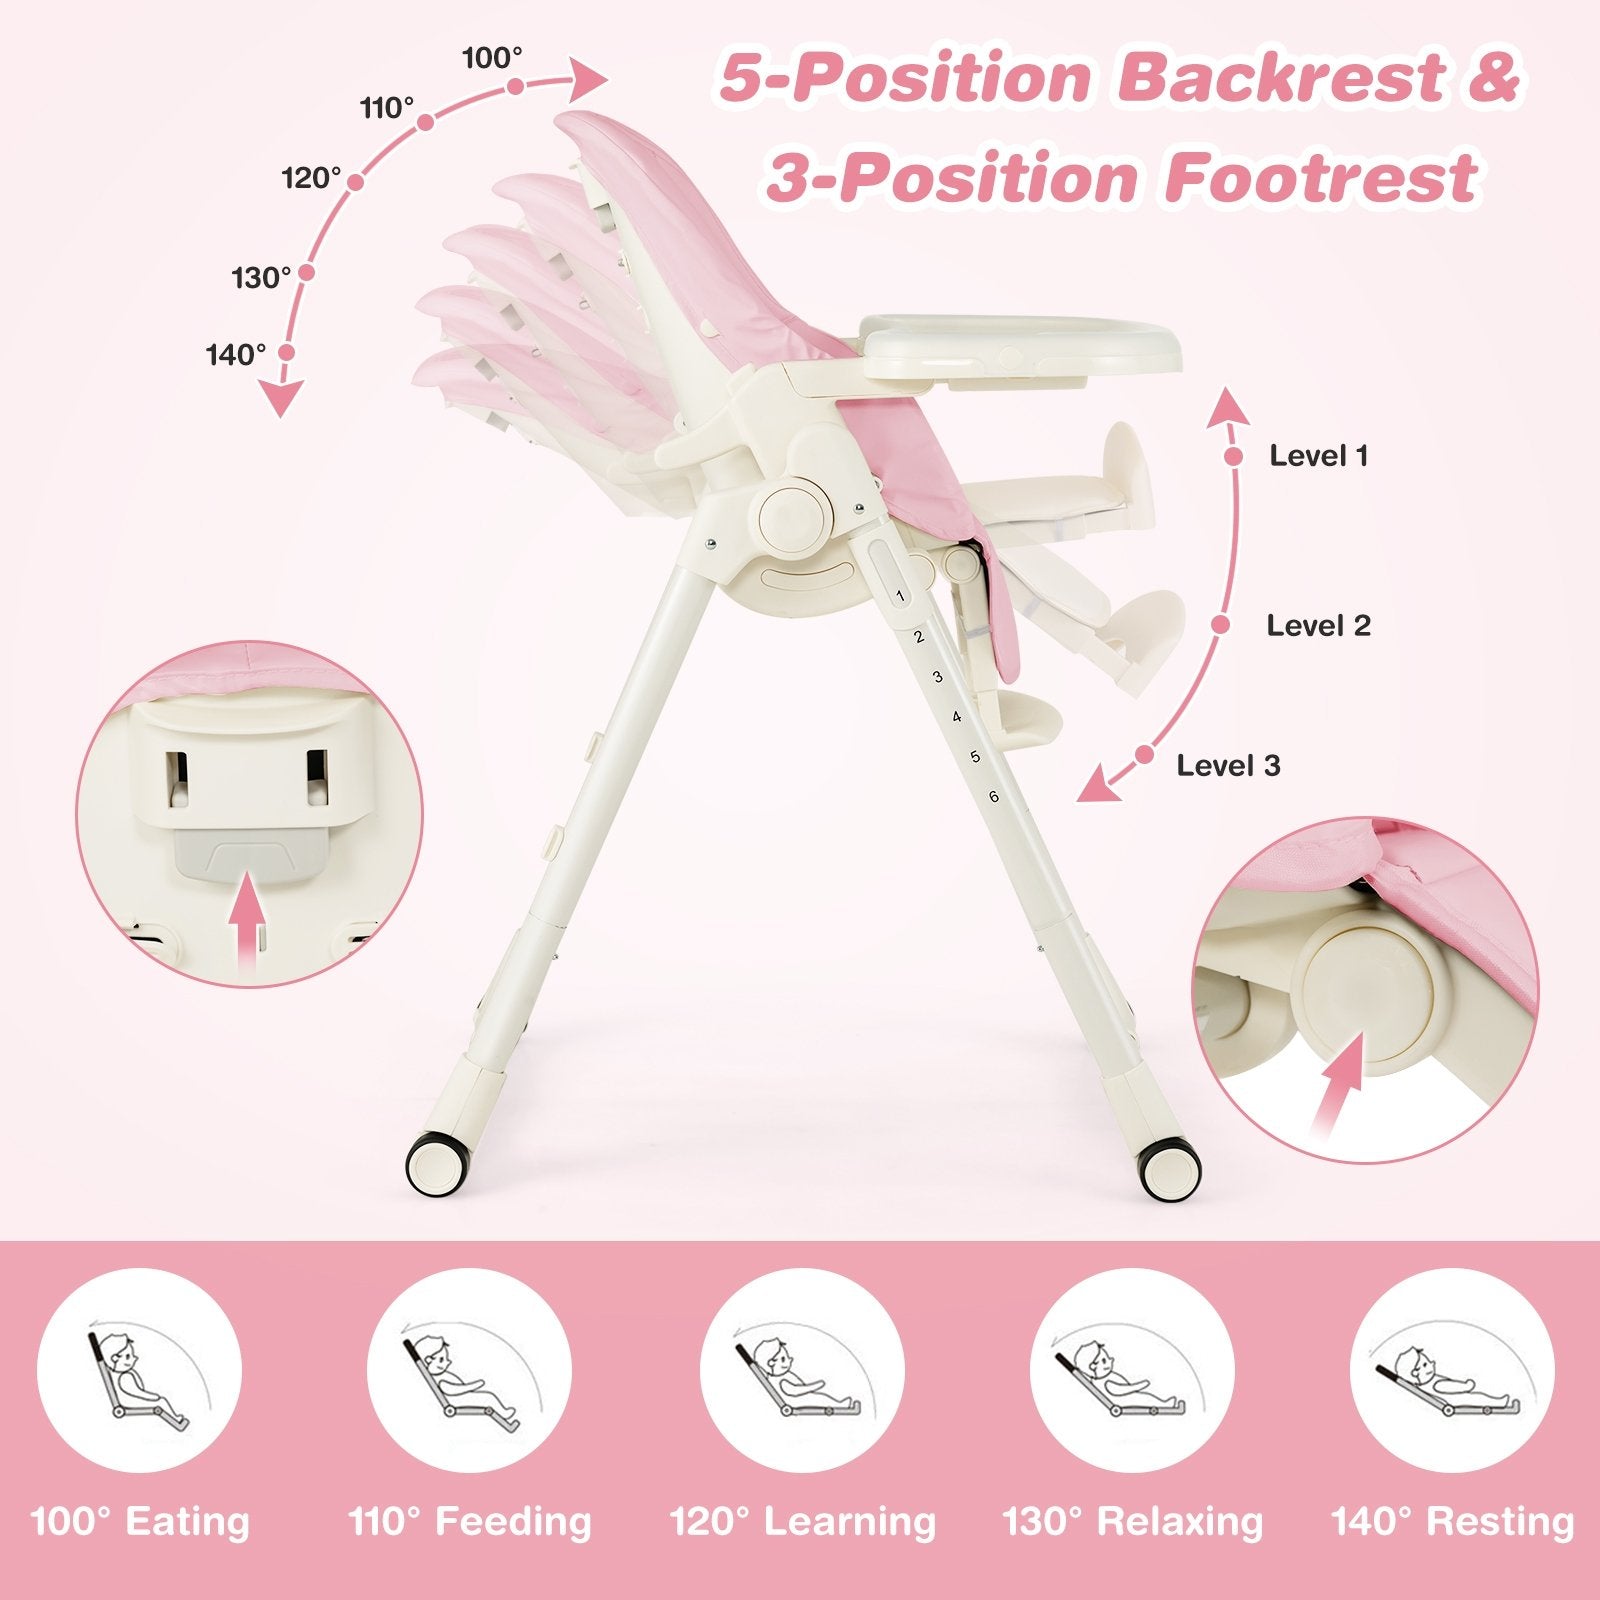 4-in-1 Baby High Chair with 6 Adjustable Heights, Pink at Gallery Canada